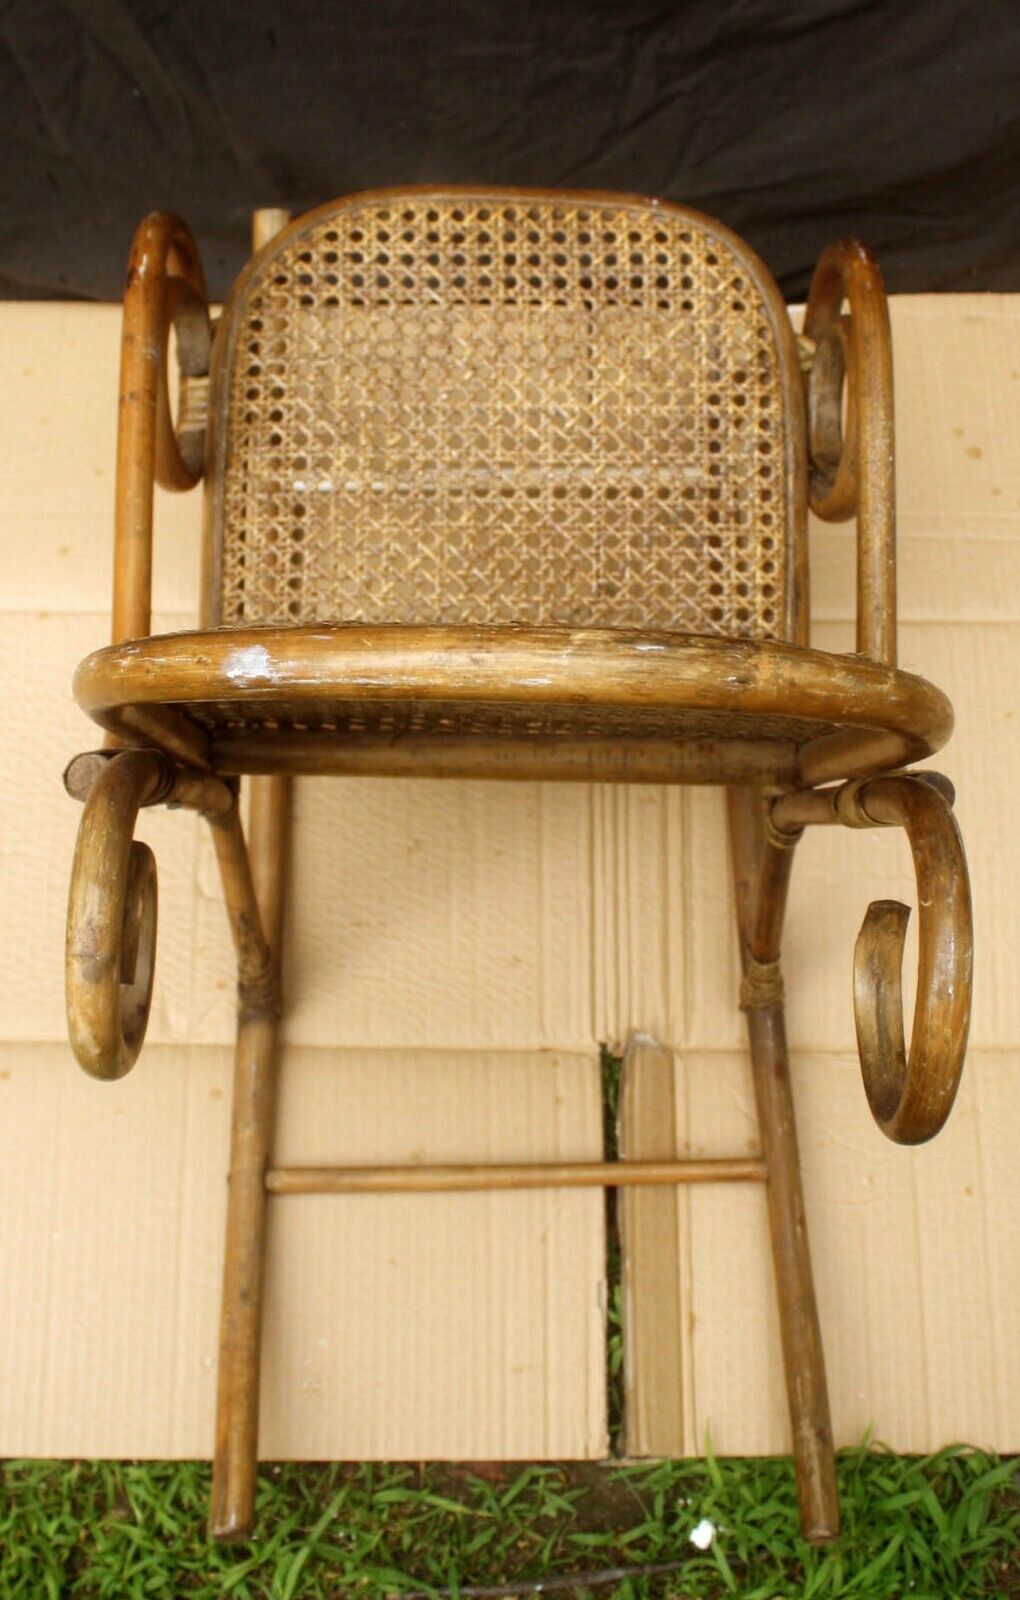 Antique Old Reclaimed Salvaged Vintage Bent Wood Wooden Caned Wicker Child Childrens Kids Rocking Chair